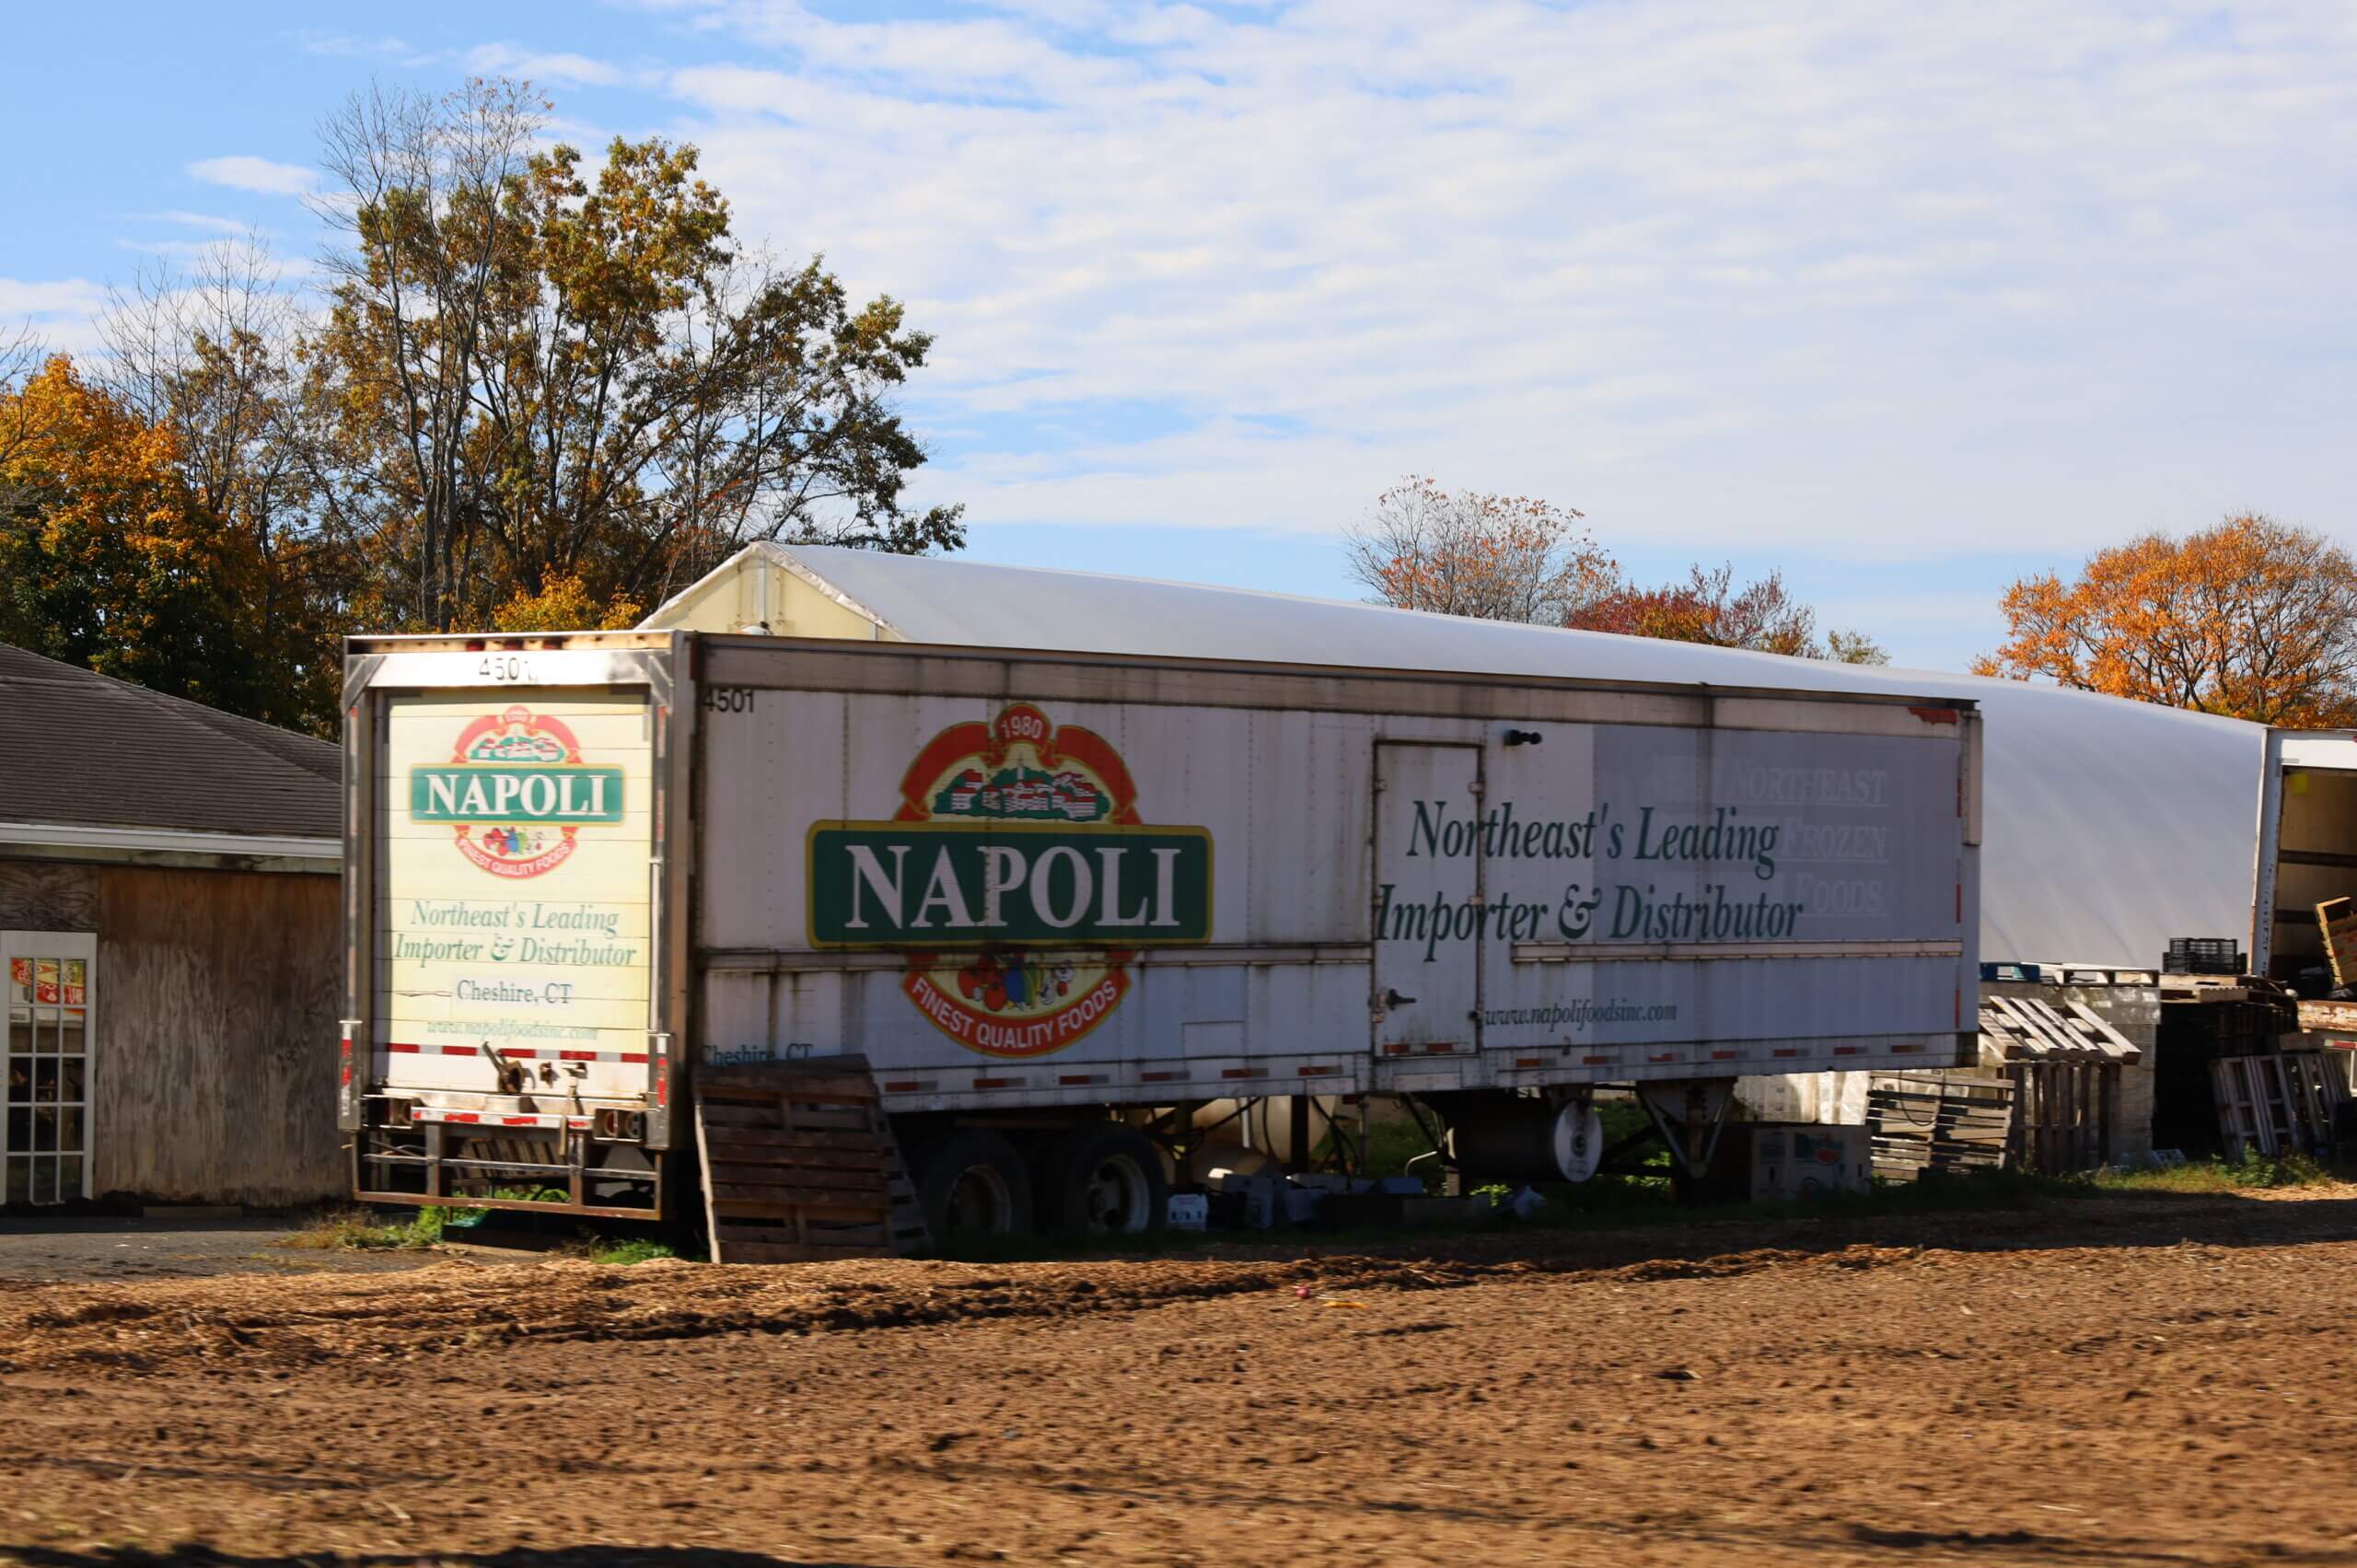 Napoli Foods, Inc. trailer in Cheshire, CT